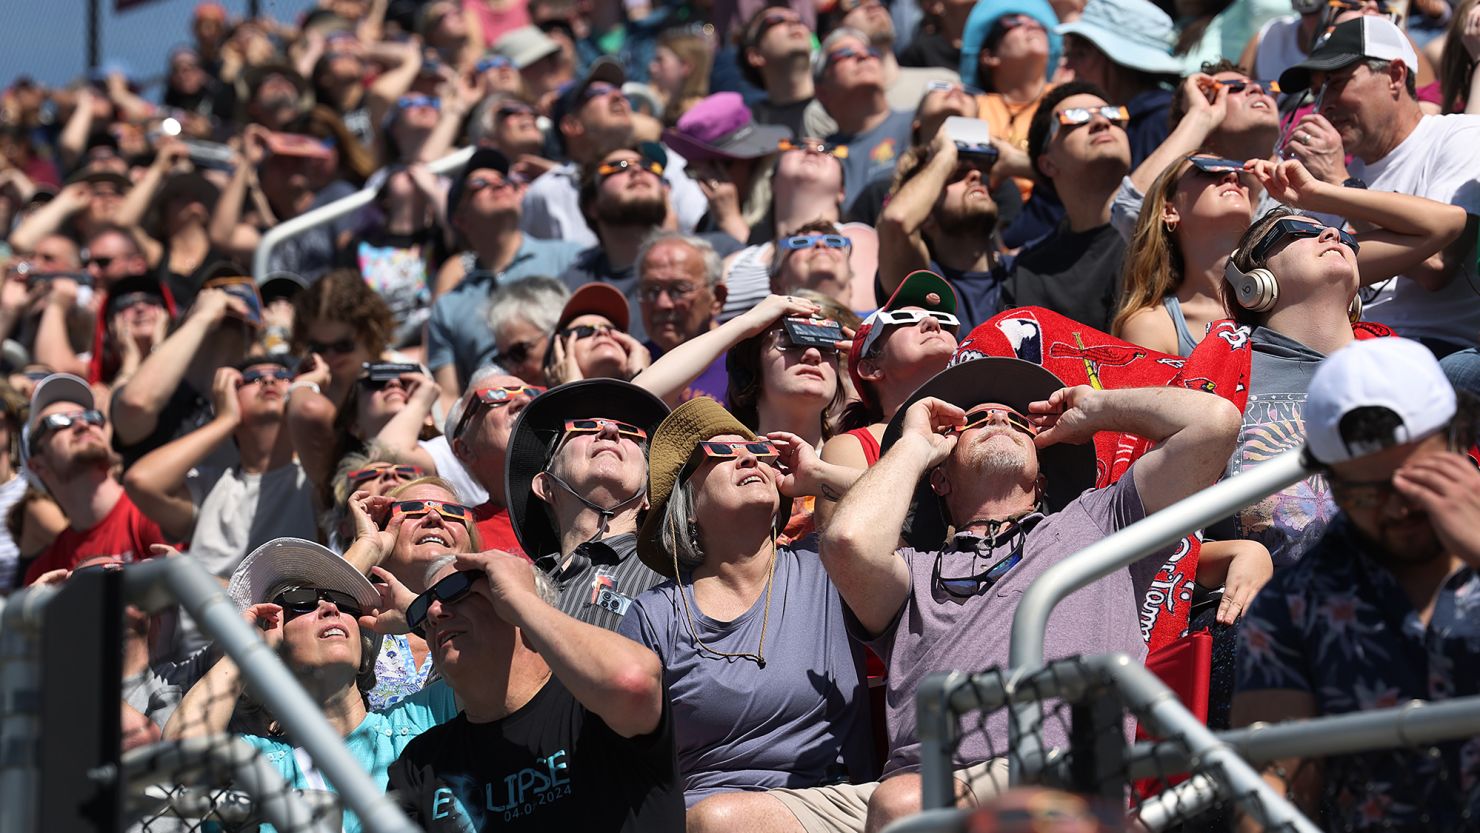 People view the start of the total eclipse on the campus of Southern Illinois University on April 8, 2024, in Carbondale, Illinois.